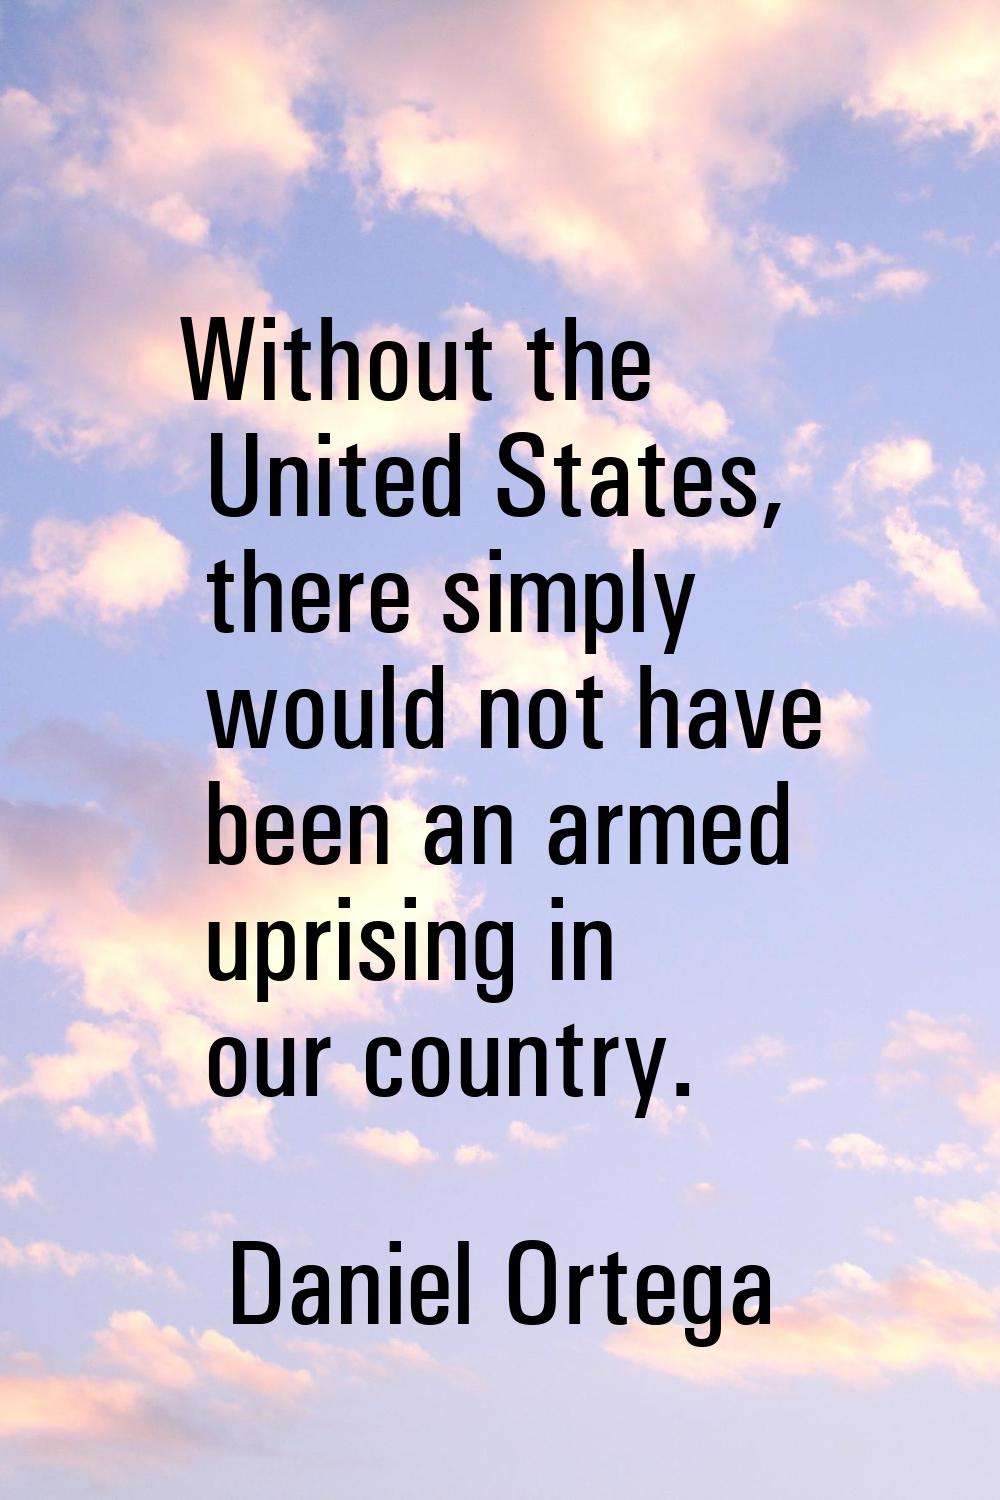 Without the United States, there simply would not have been an armed uprising in our country.